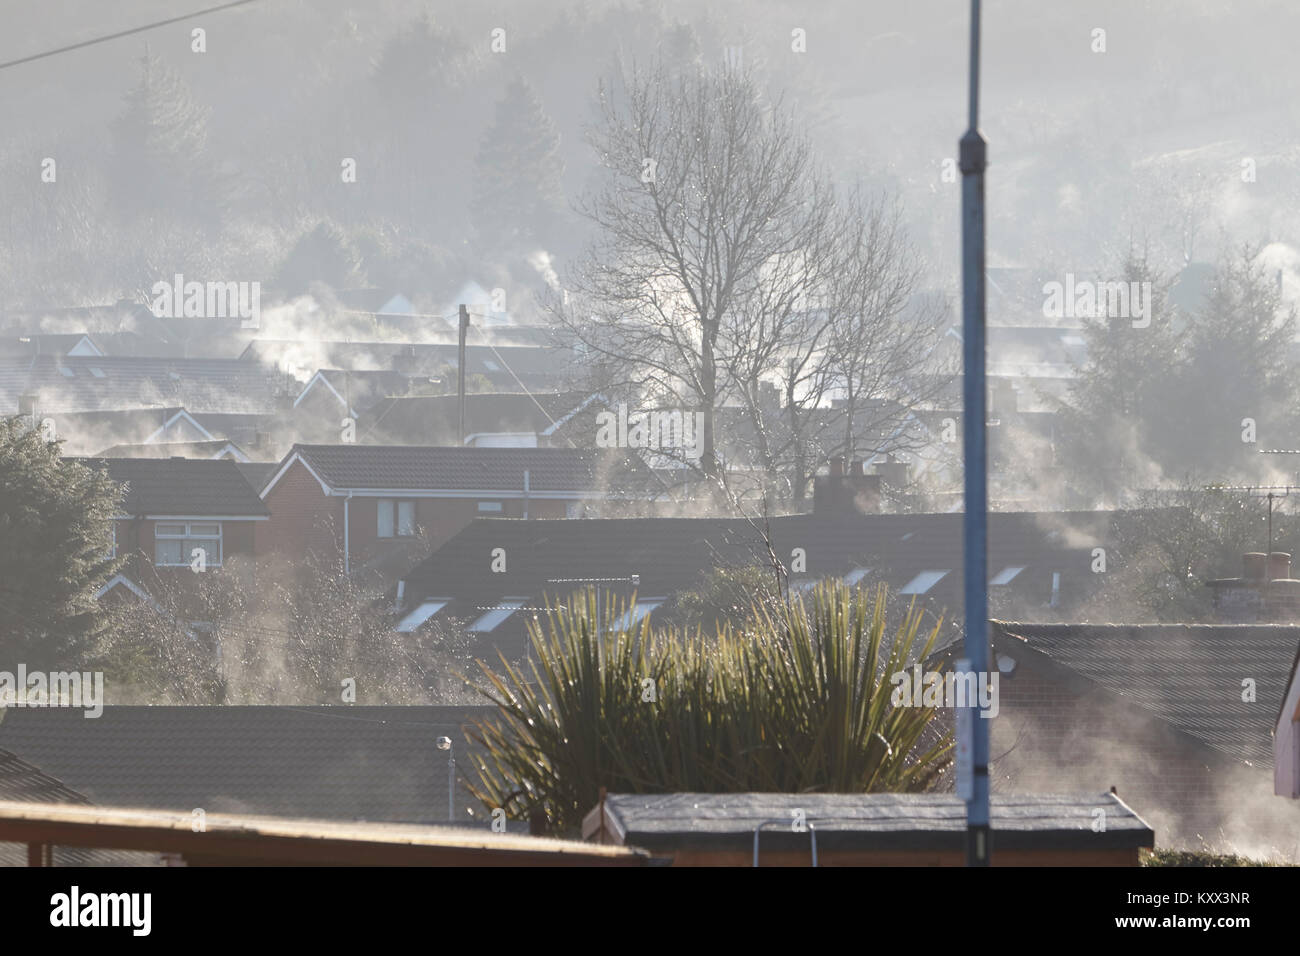 fog clearing and buildings drying out under the sun on a foggy day in the uk Stock Photo